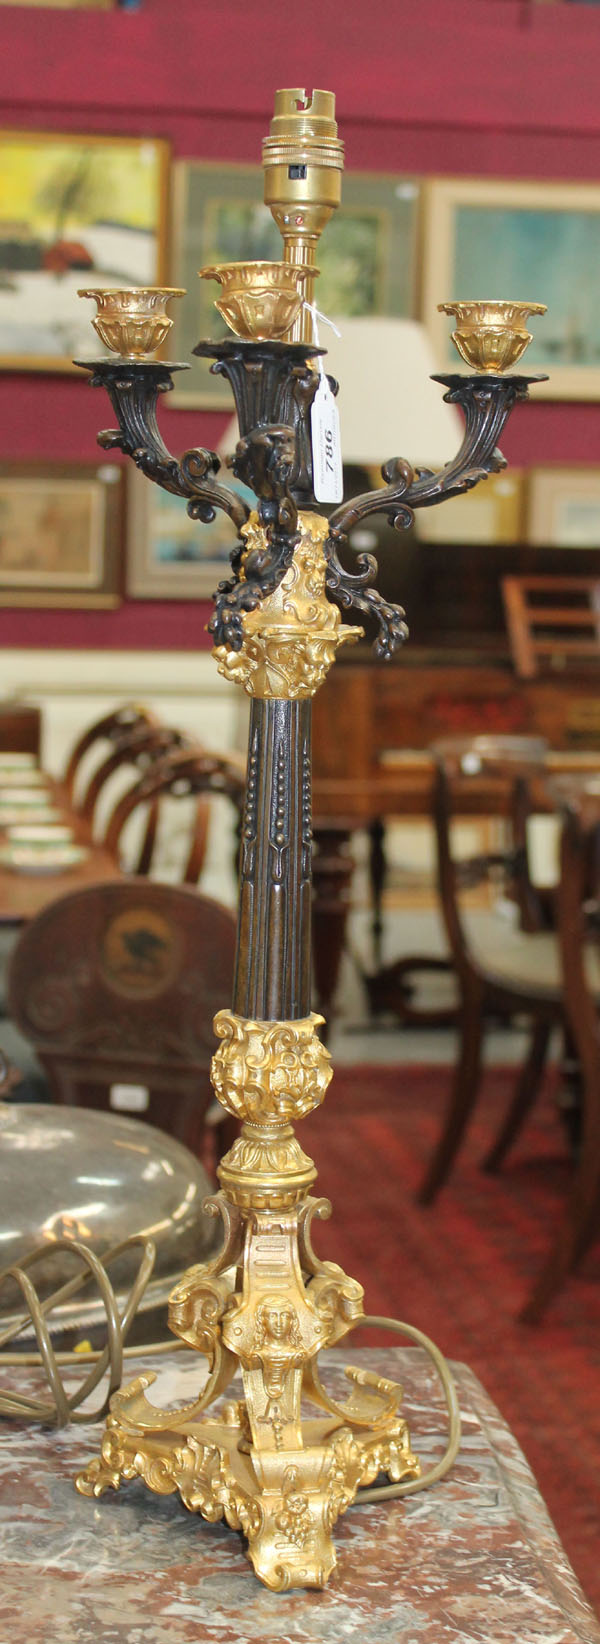 Pair of good quality mid-nineteenth century French bronze and ormolu three branch candelabra